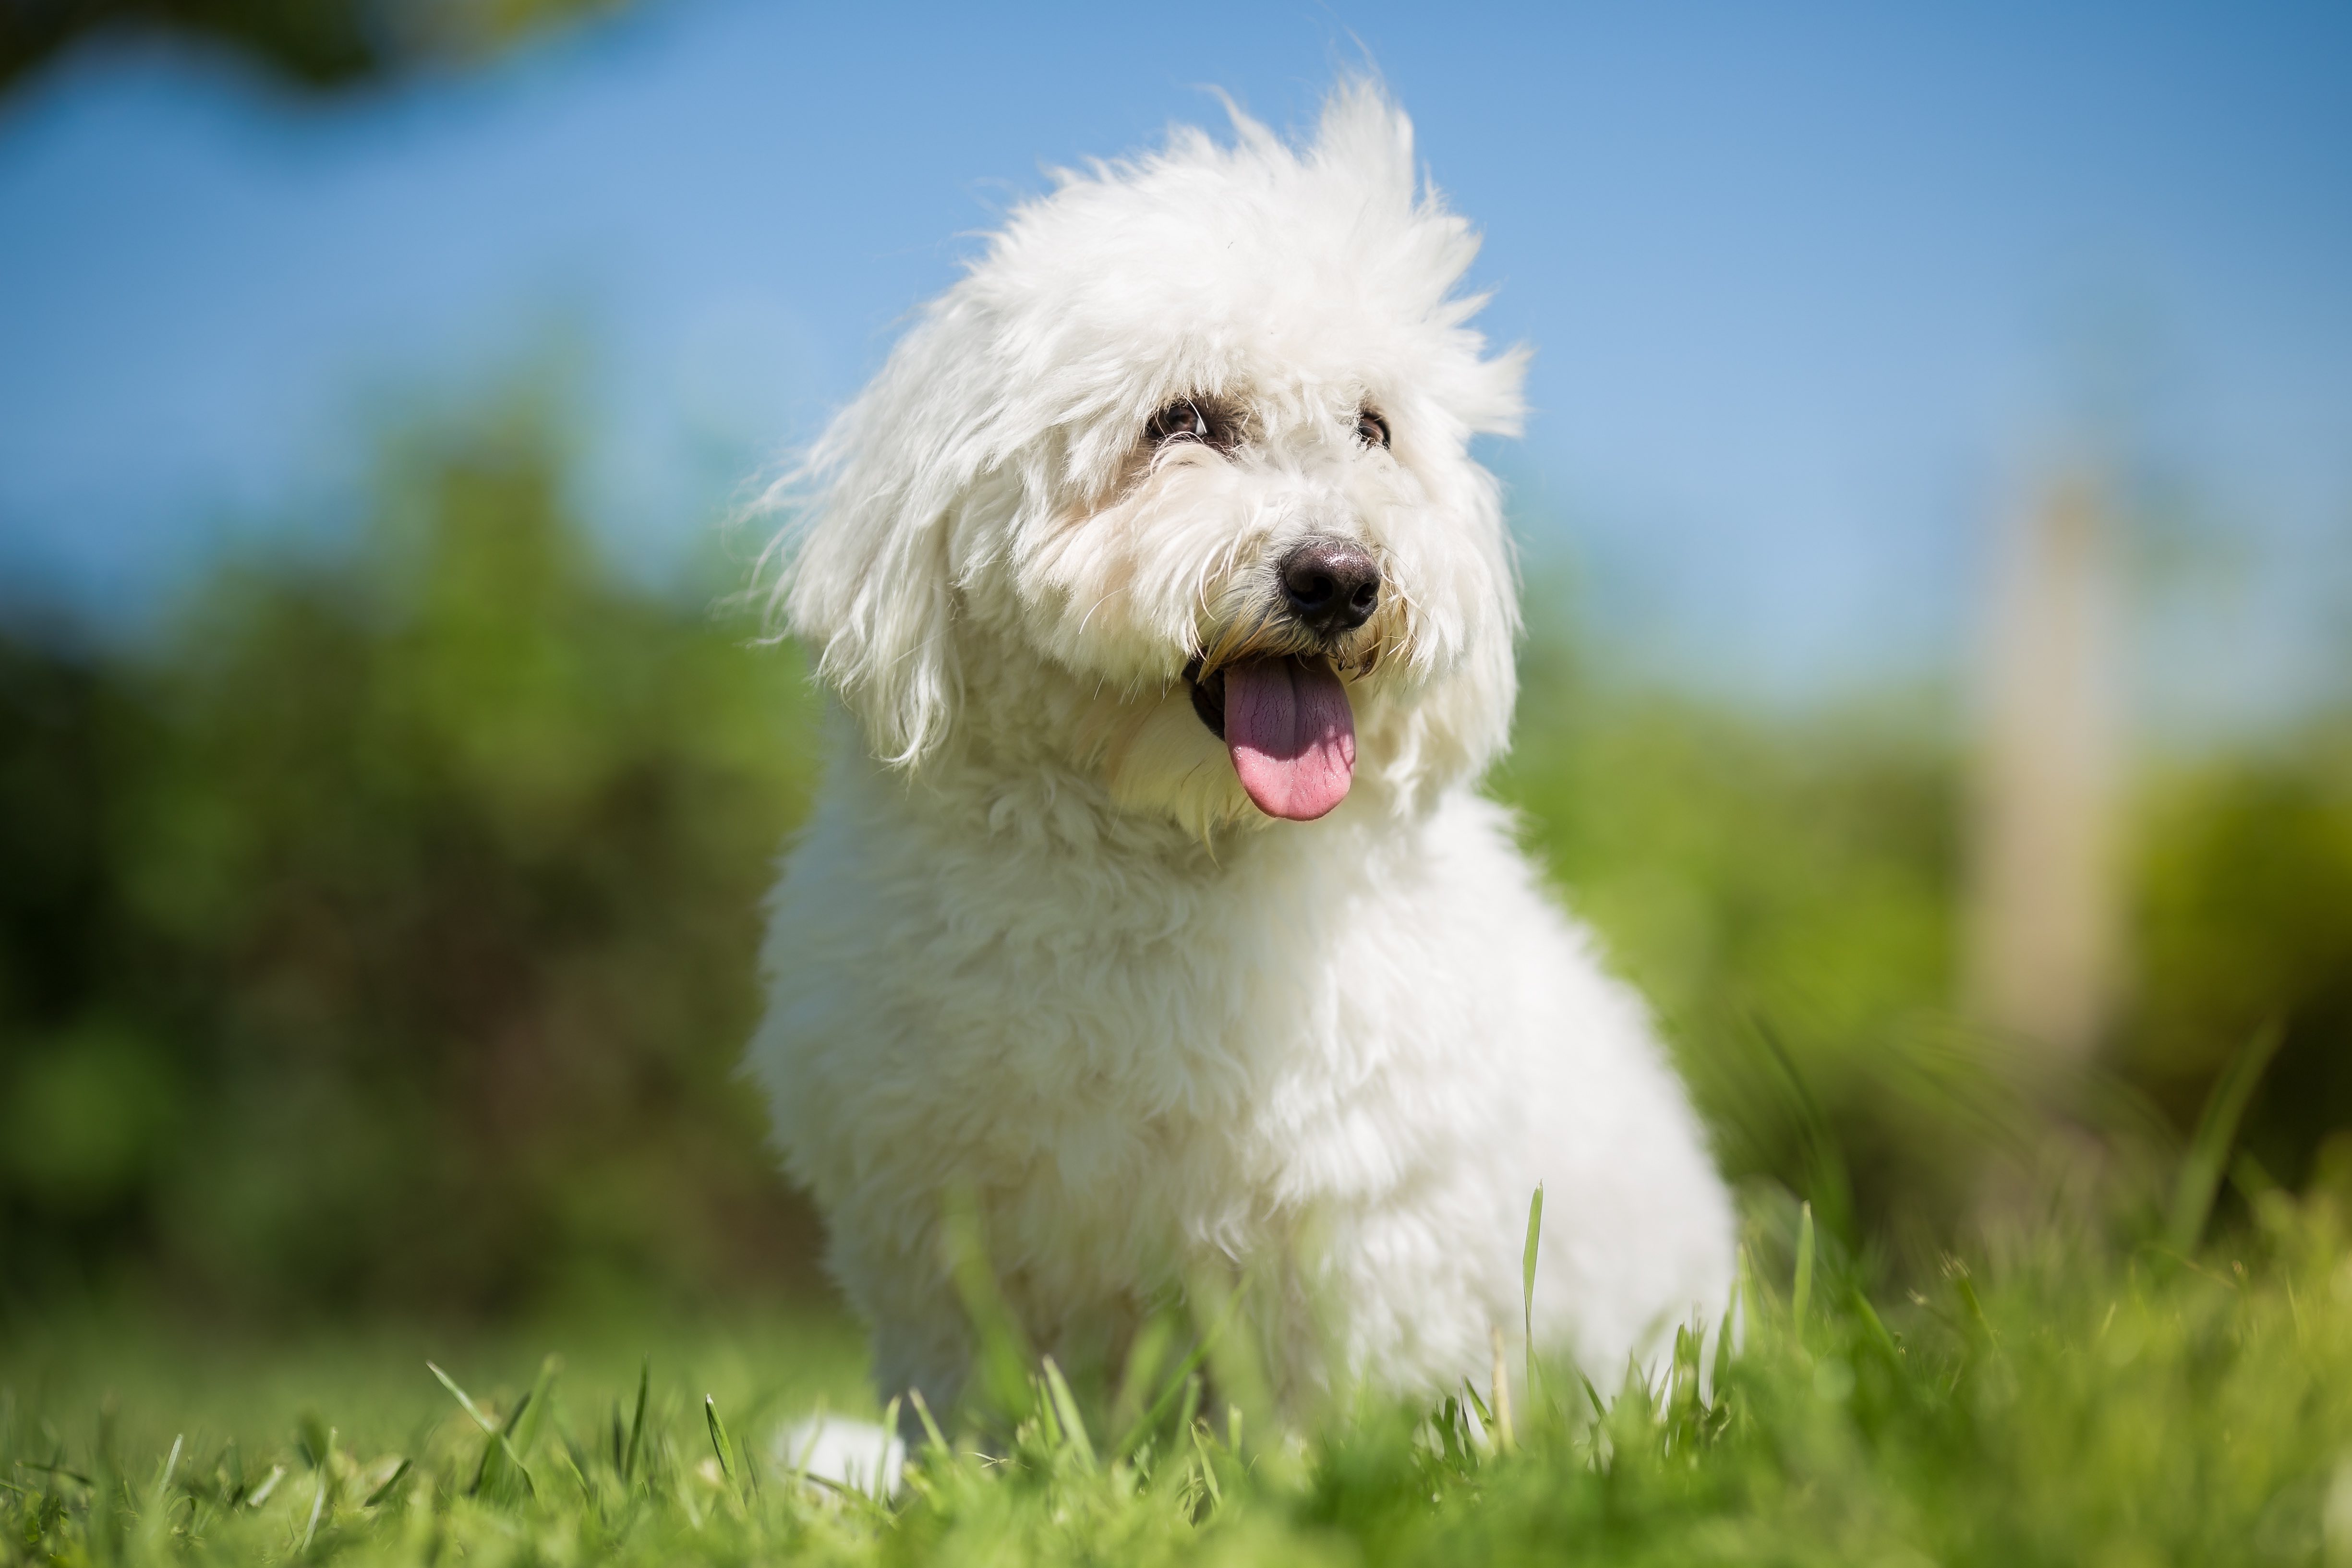 white coton de tulear sitting in grass with hair blowing in the wind